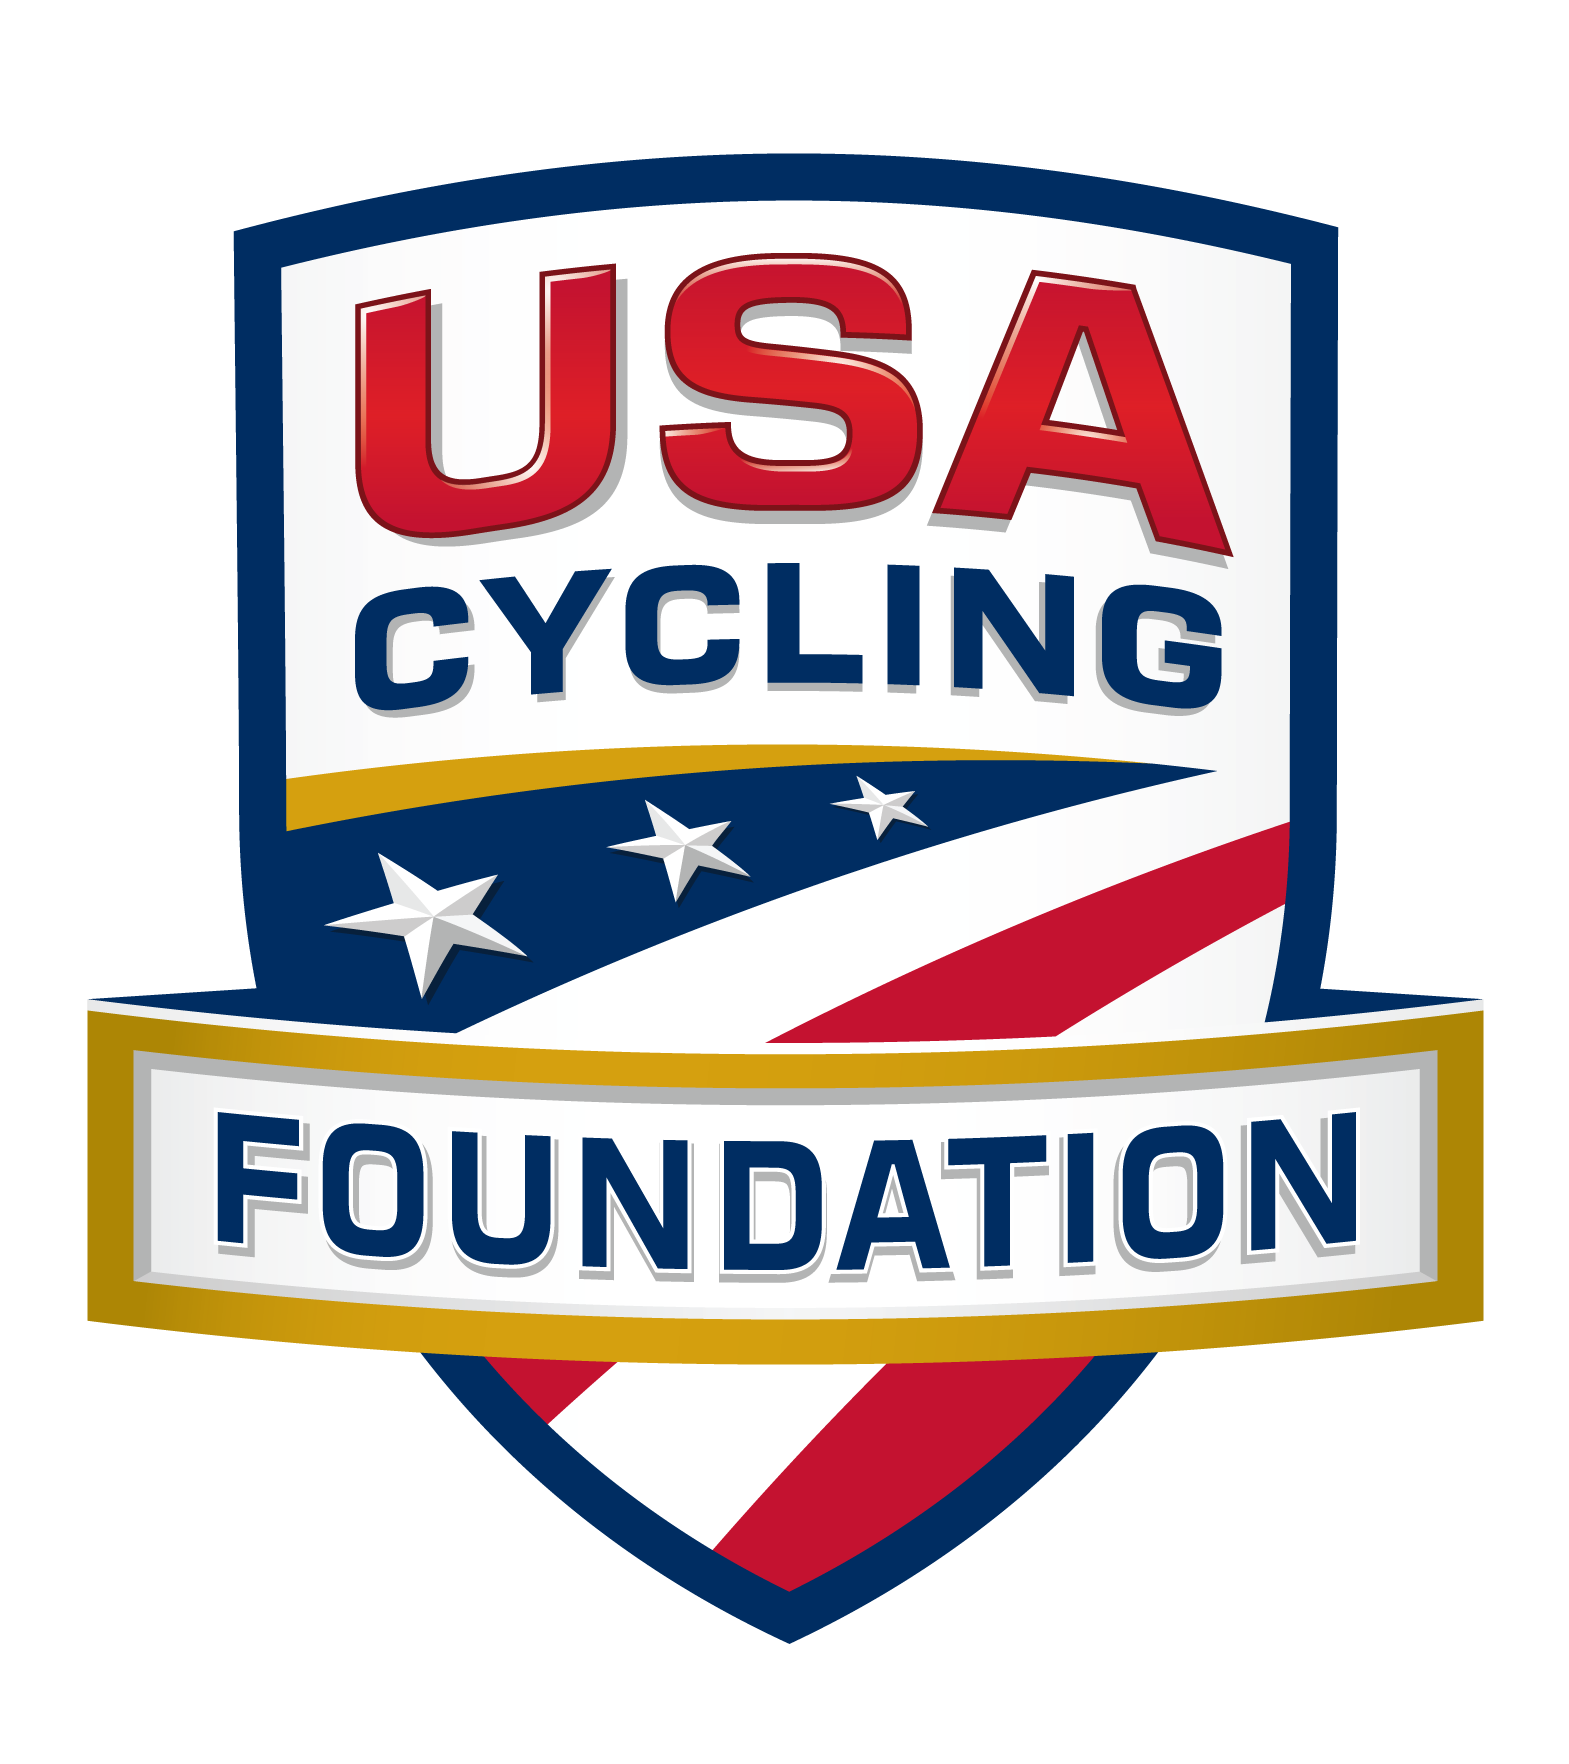 olympics clipart track cycling